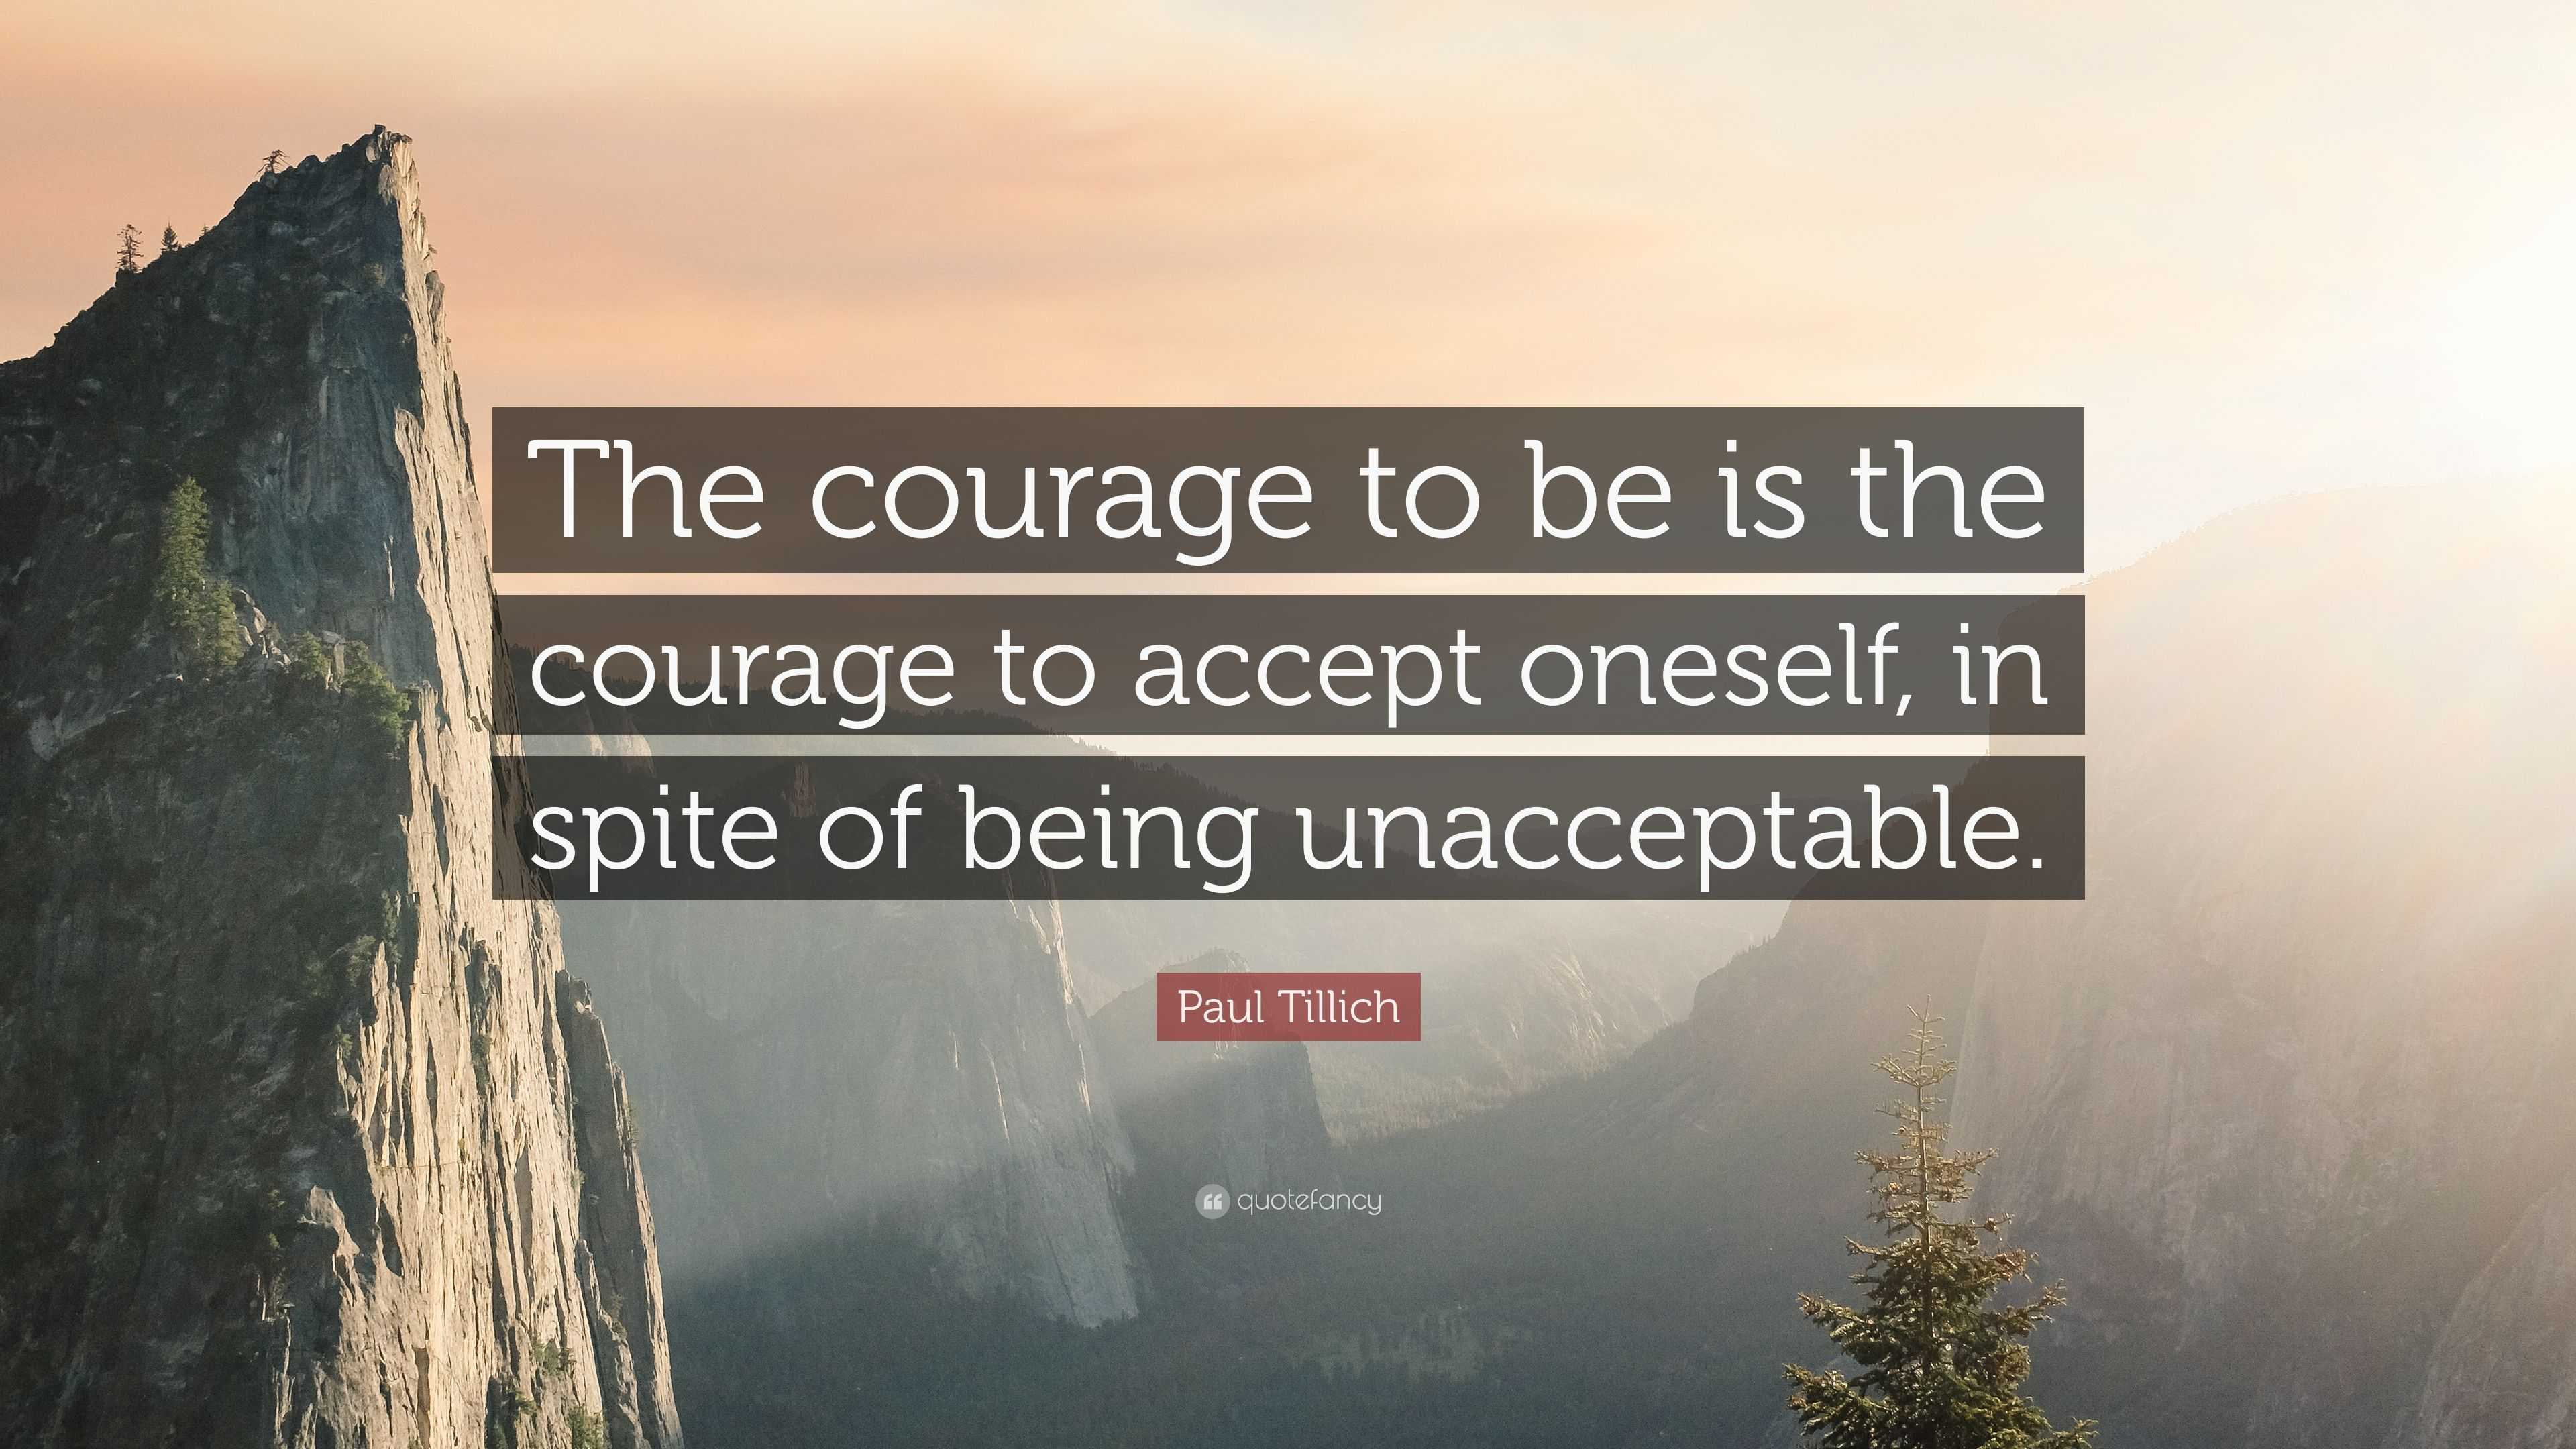 Paul Tillich Quote: “The courage to be is the courage to accept oneself ...